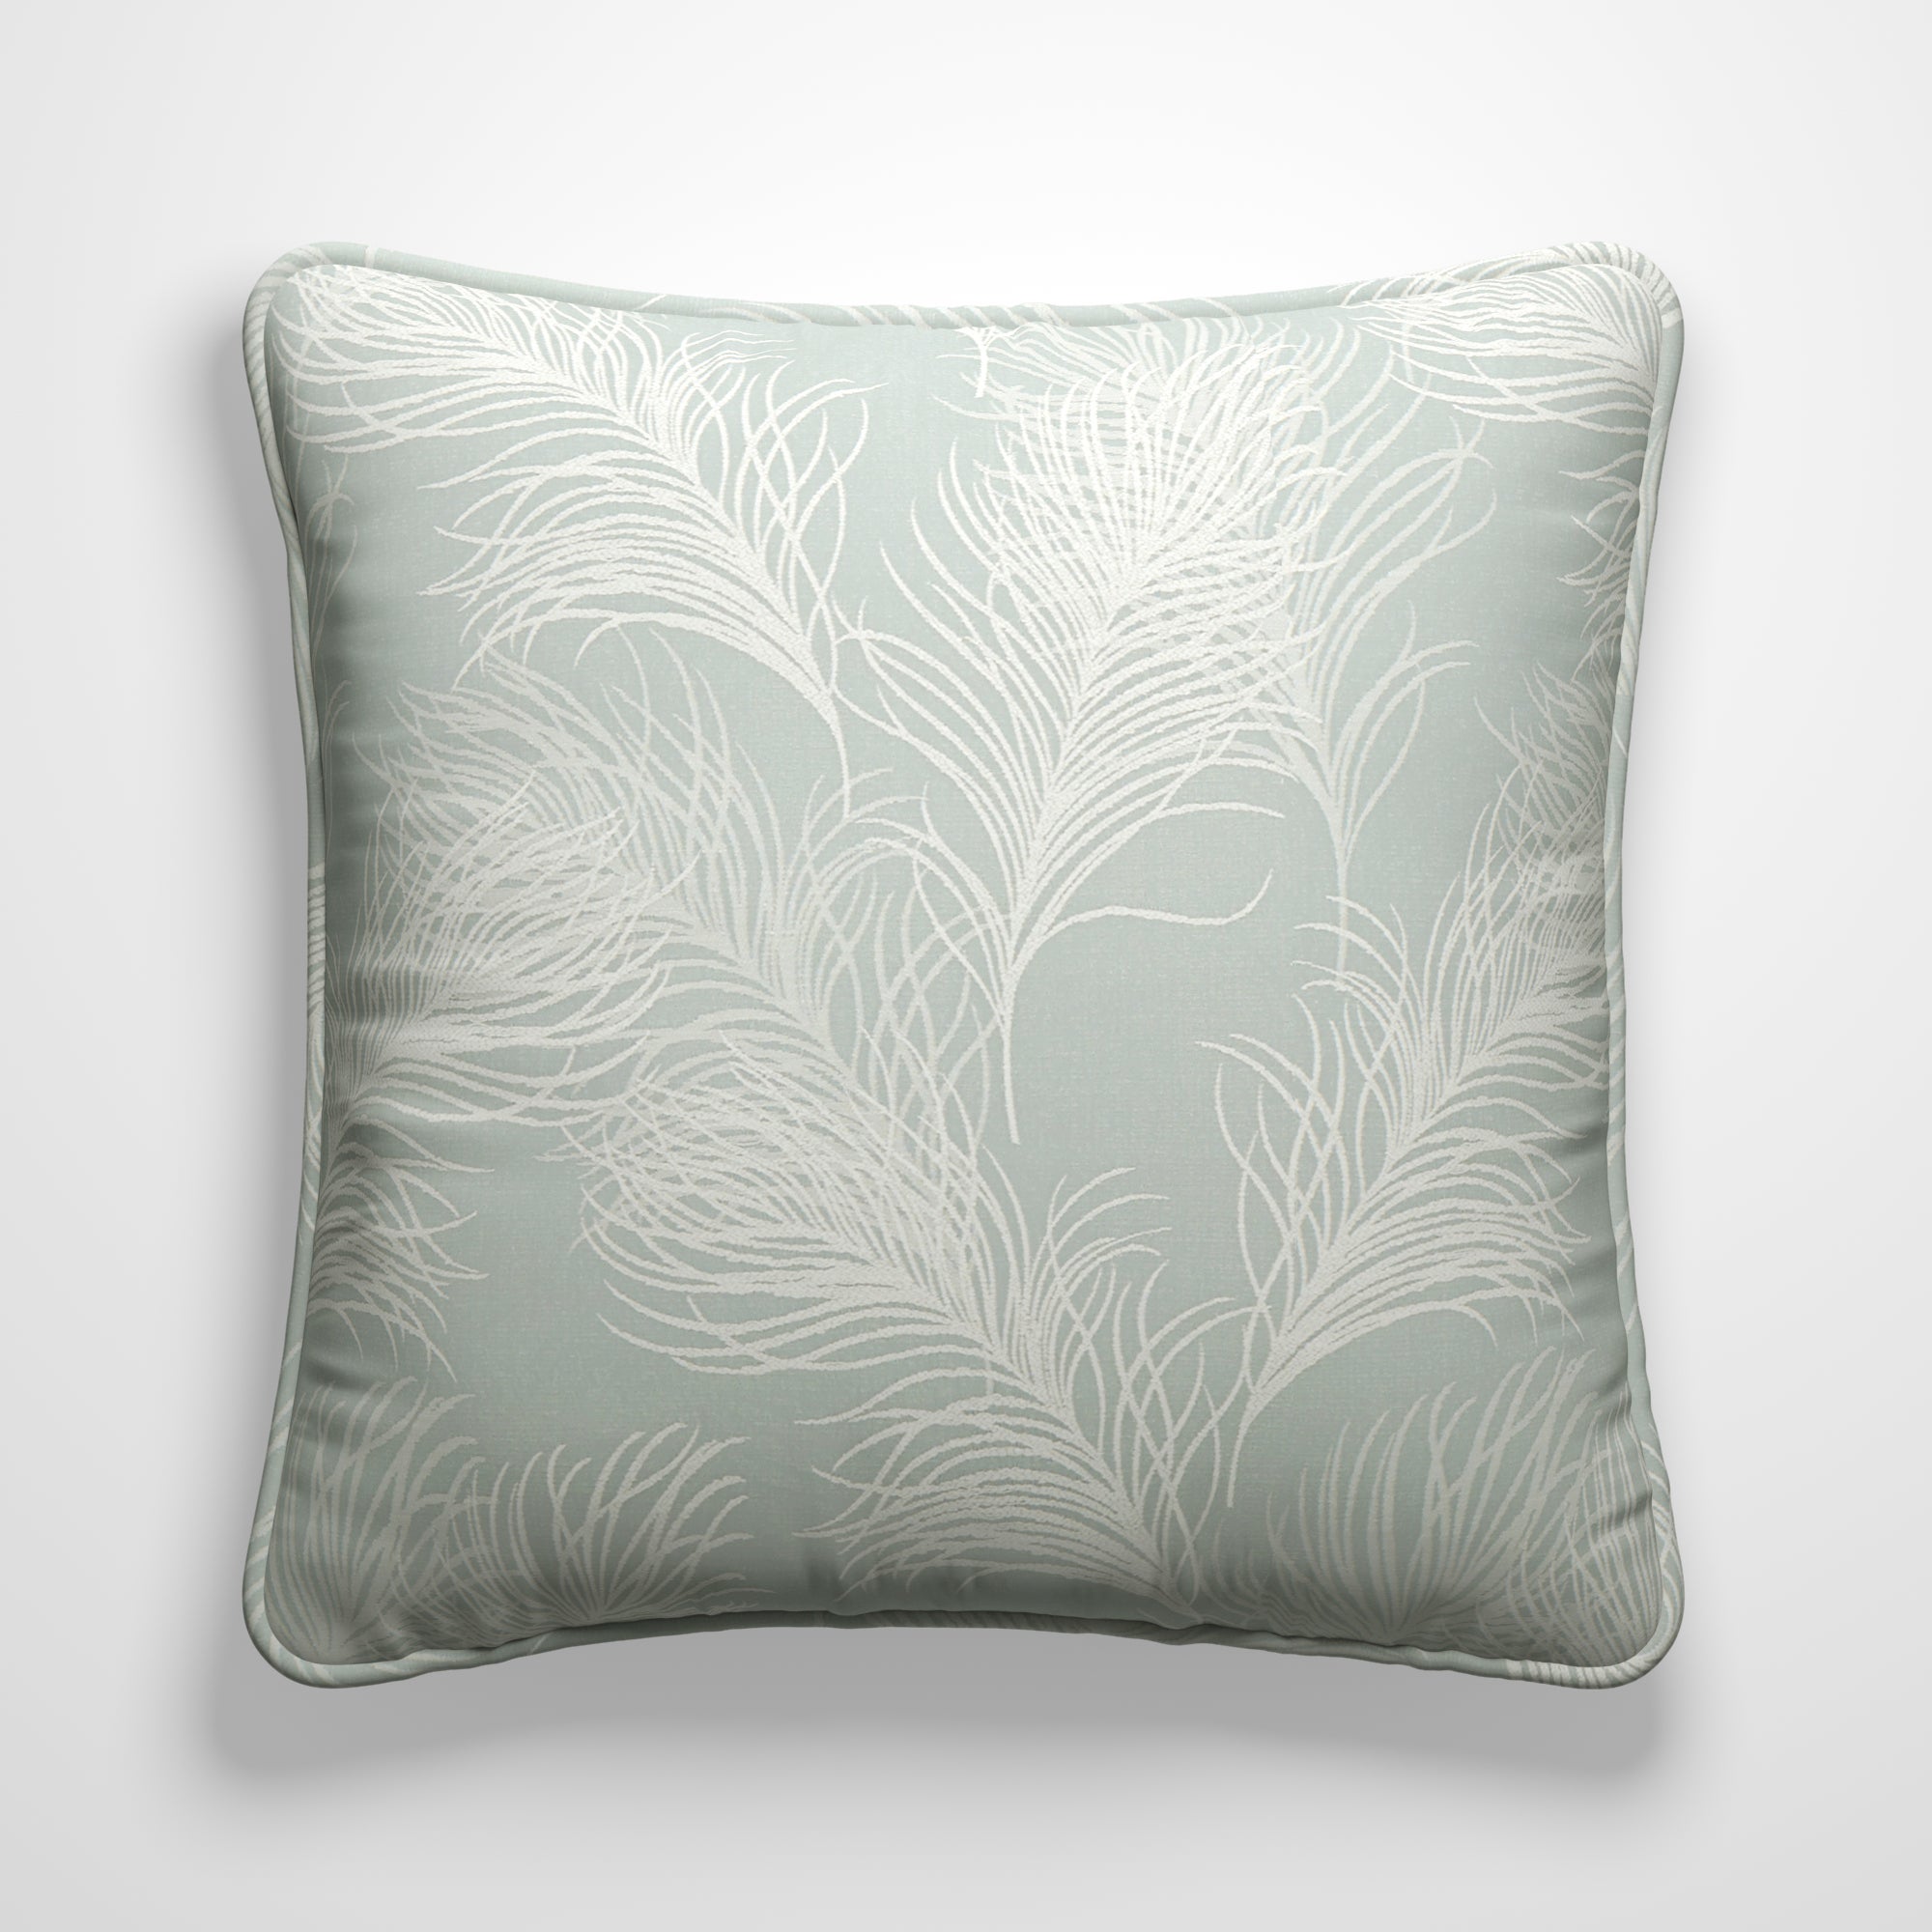 Feathers Made to Order Cushion Cover Feathers Duck Egg